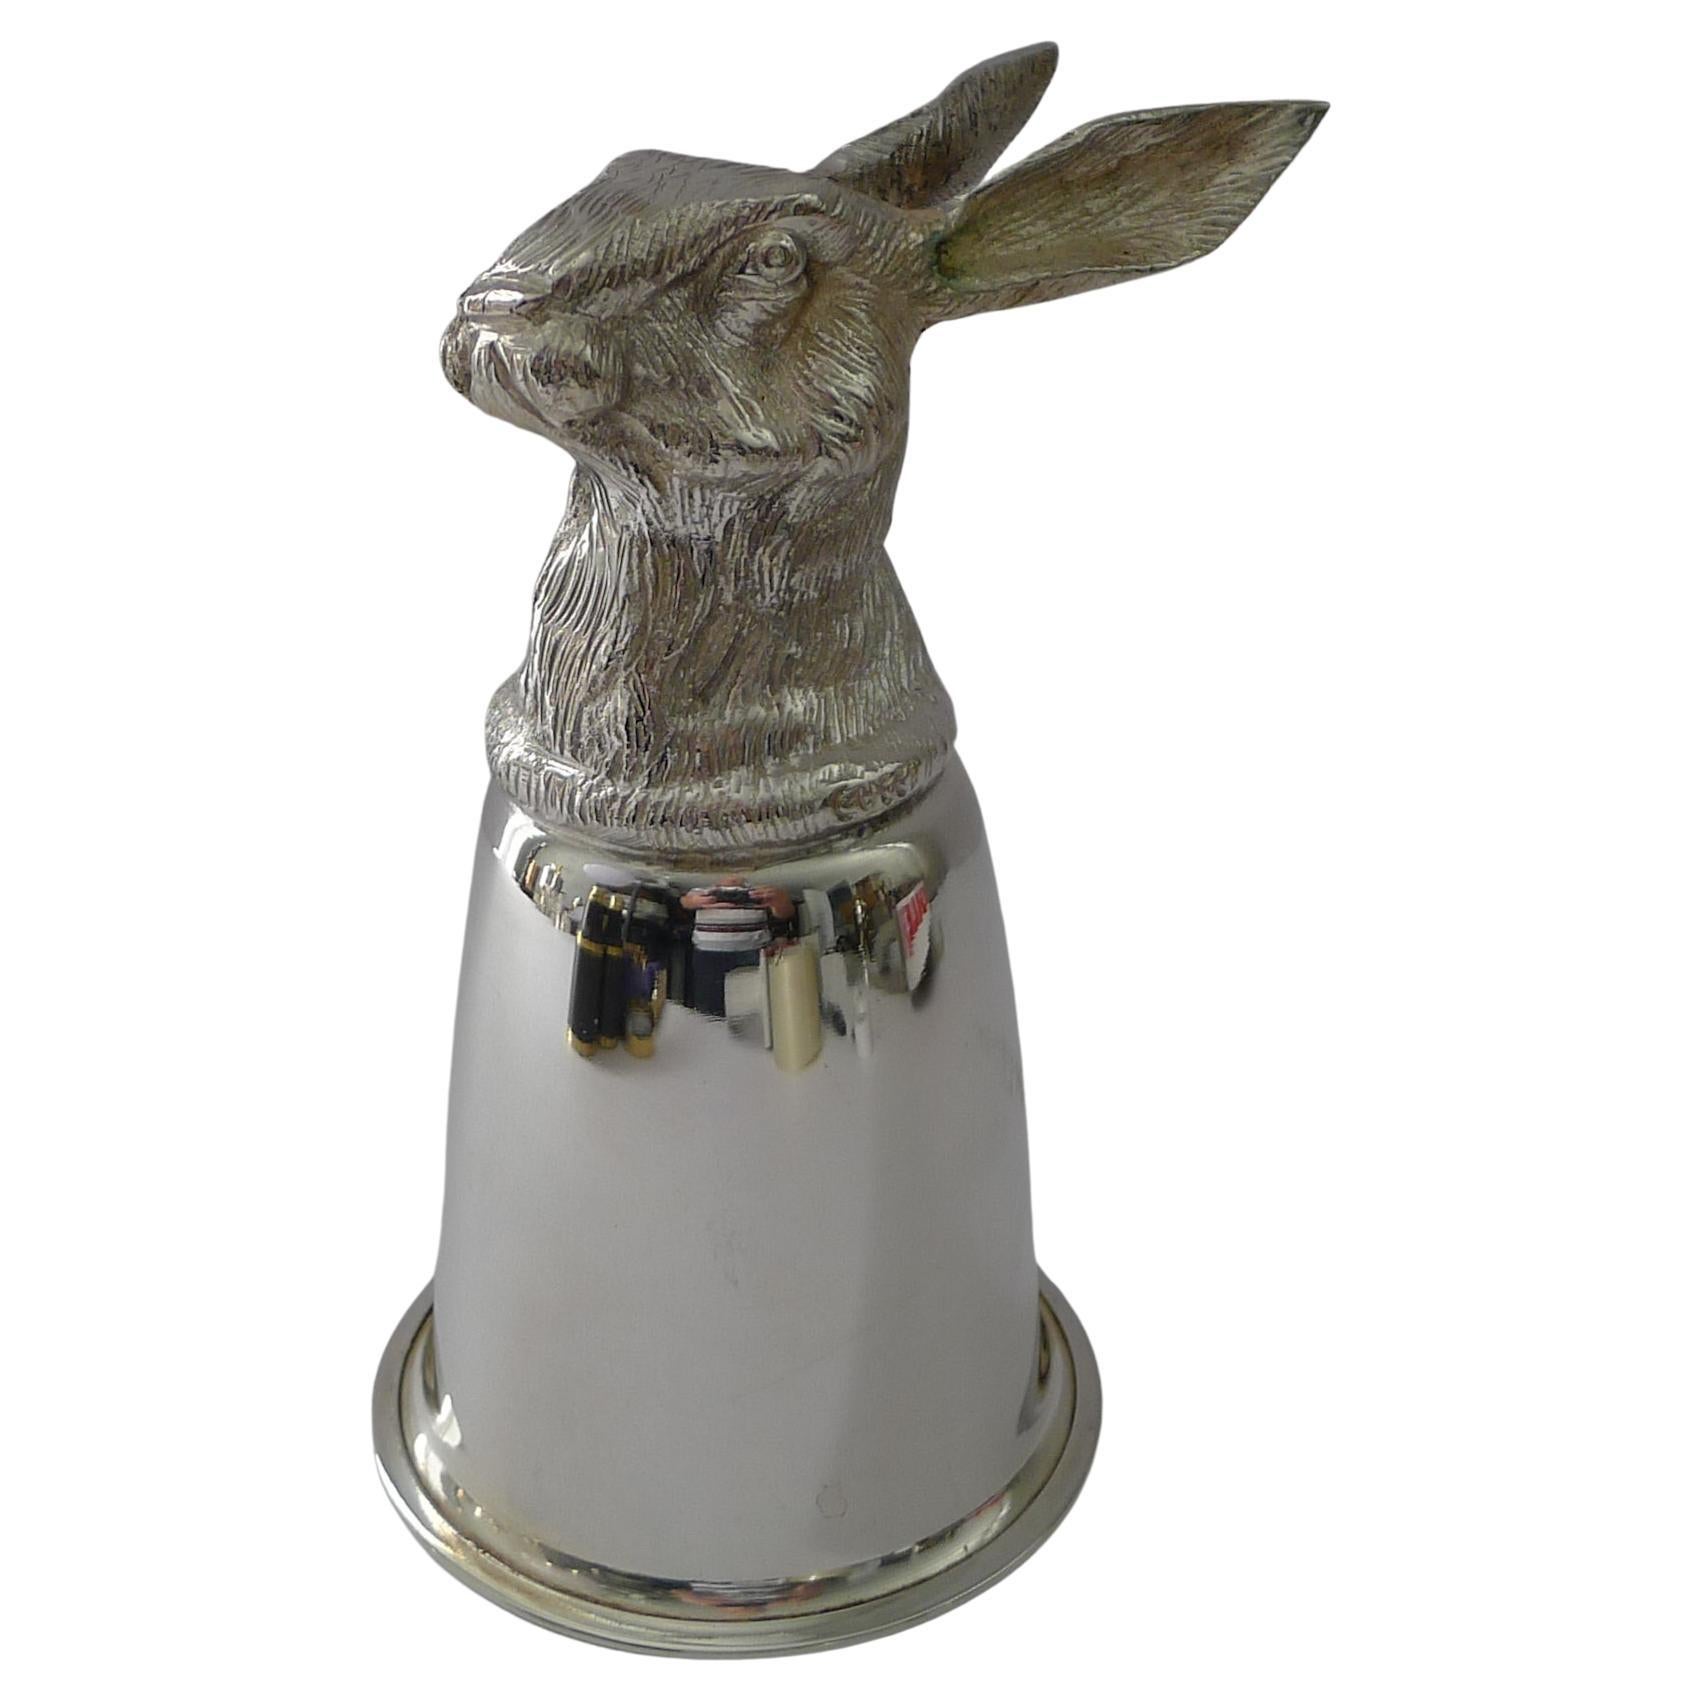 Gucci, Italy - Silver Plated Stirrup Cup - Hare c.1970